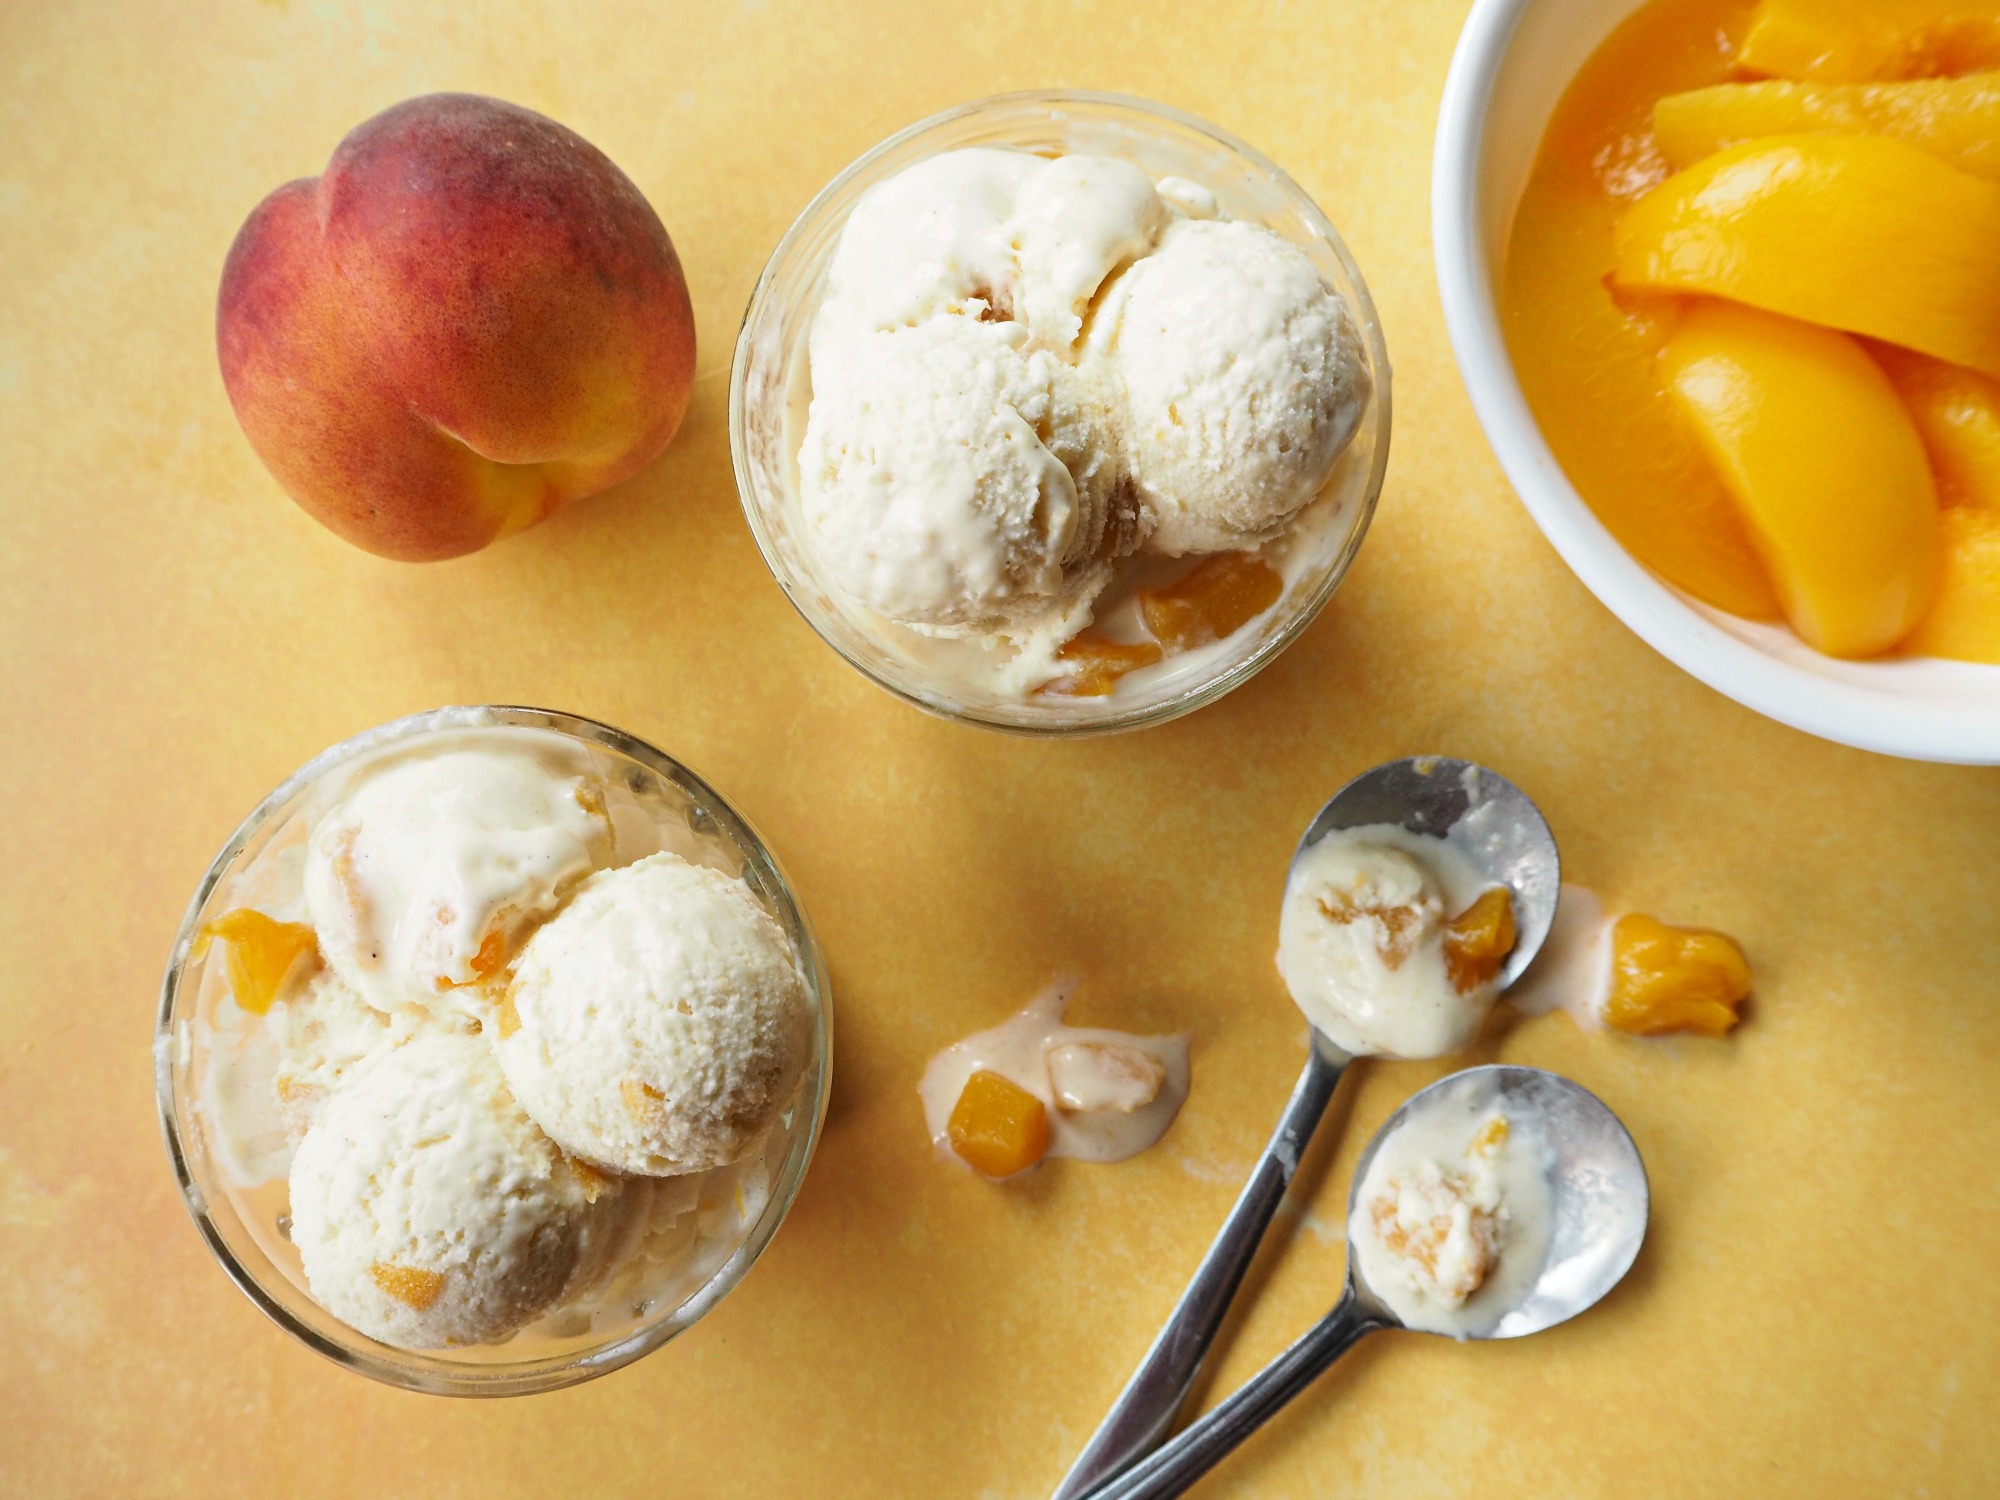 A top down view of 2 glass bowls filled with peach ice cream, 2 dirty spoons, a peach and a bowl of sliced peaches.